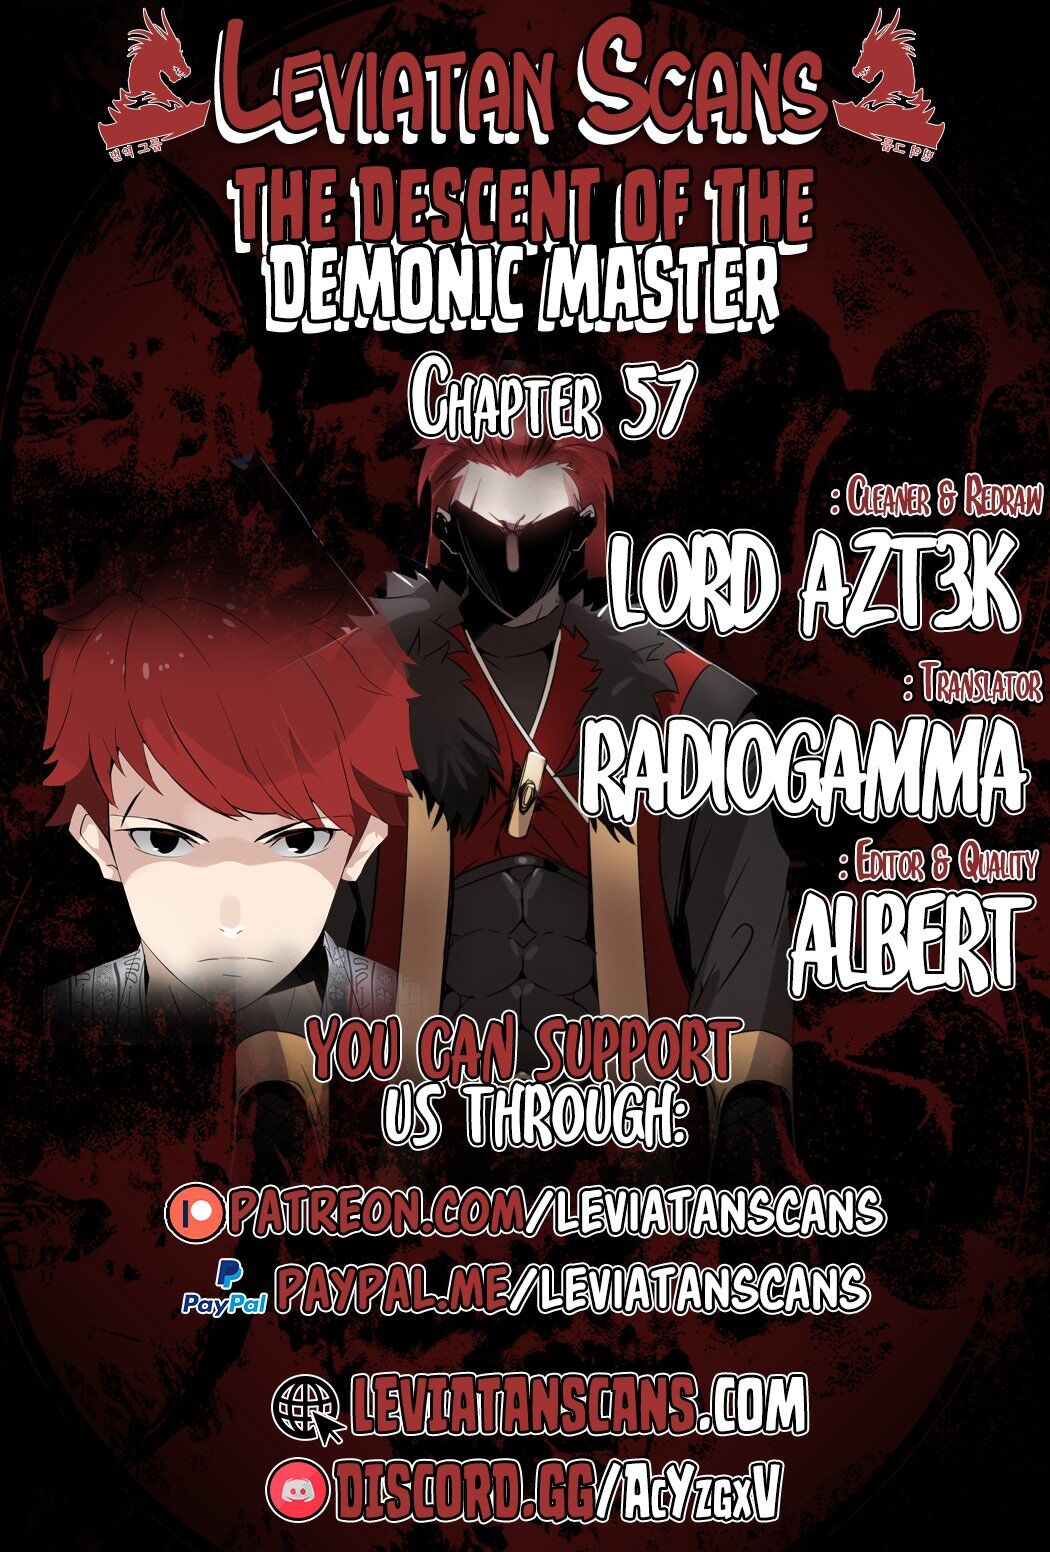 The Descent Of The Demonic Master Chapter 57